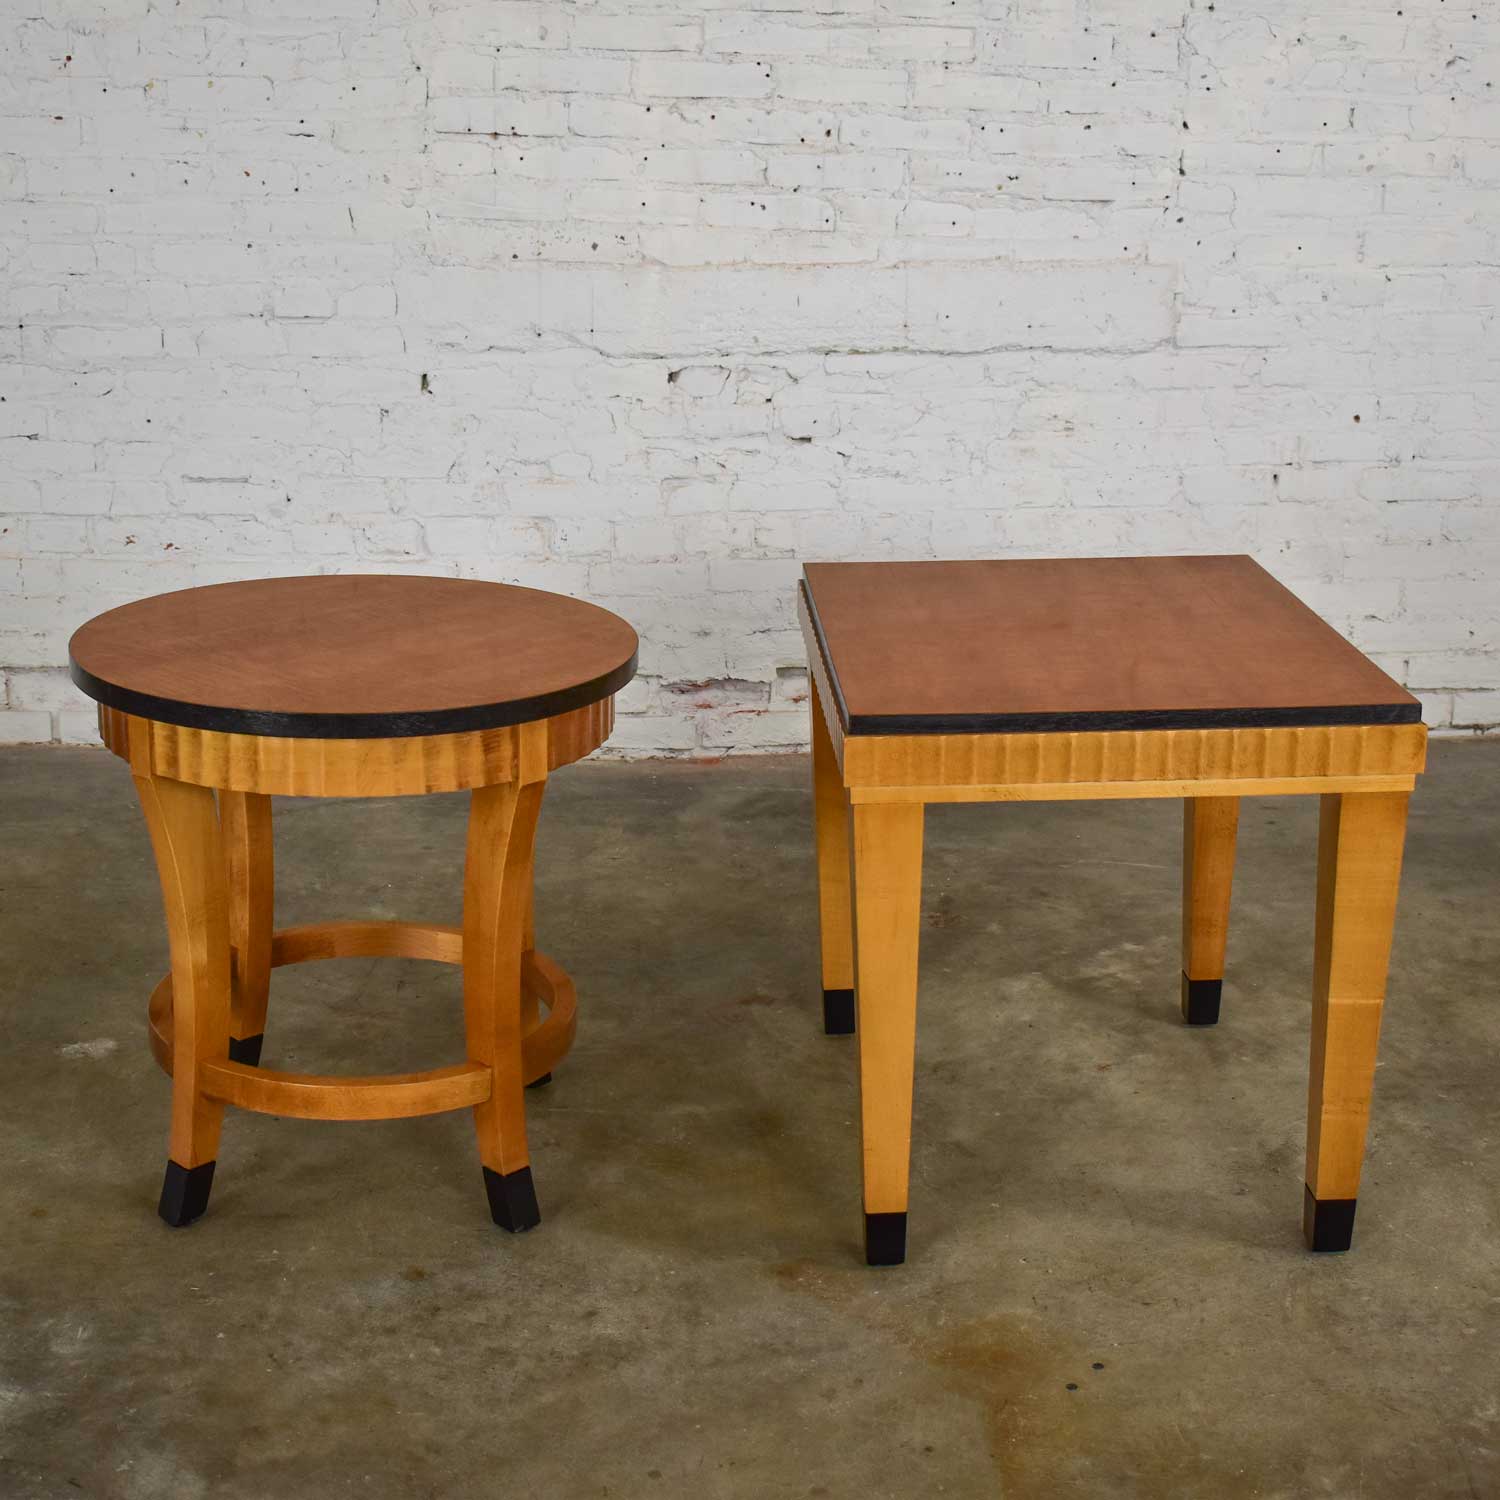 Pair Lane Art Deco Revival End Tables Mid-Toned Wood with Black Accents 1 Rectangle 1 Round